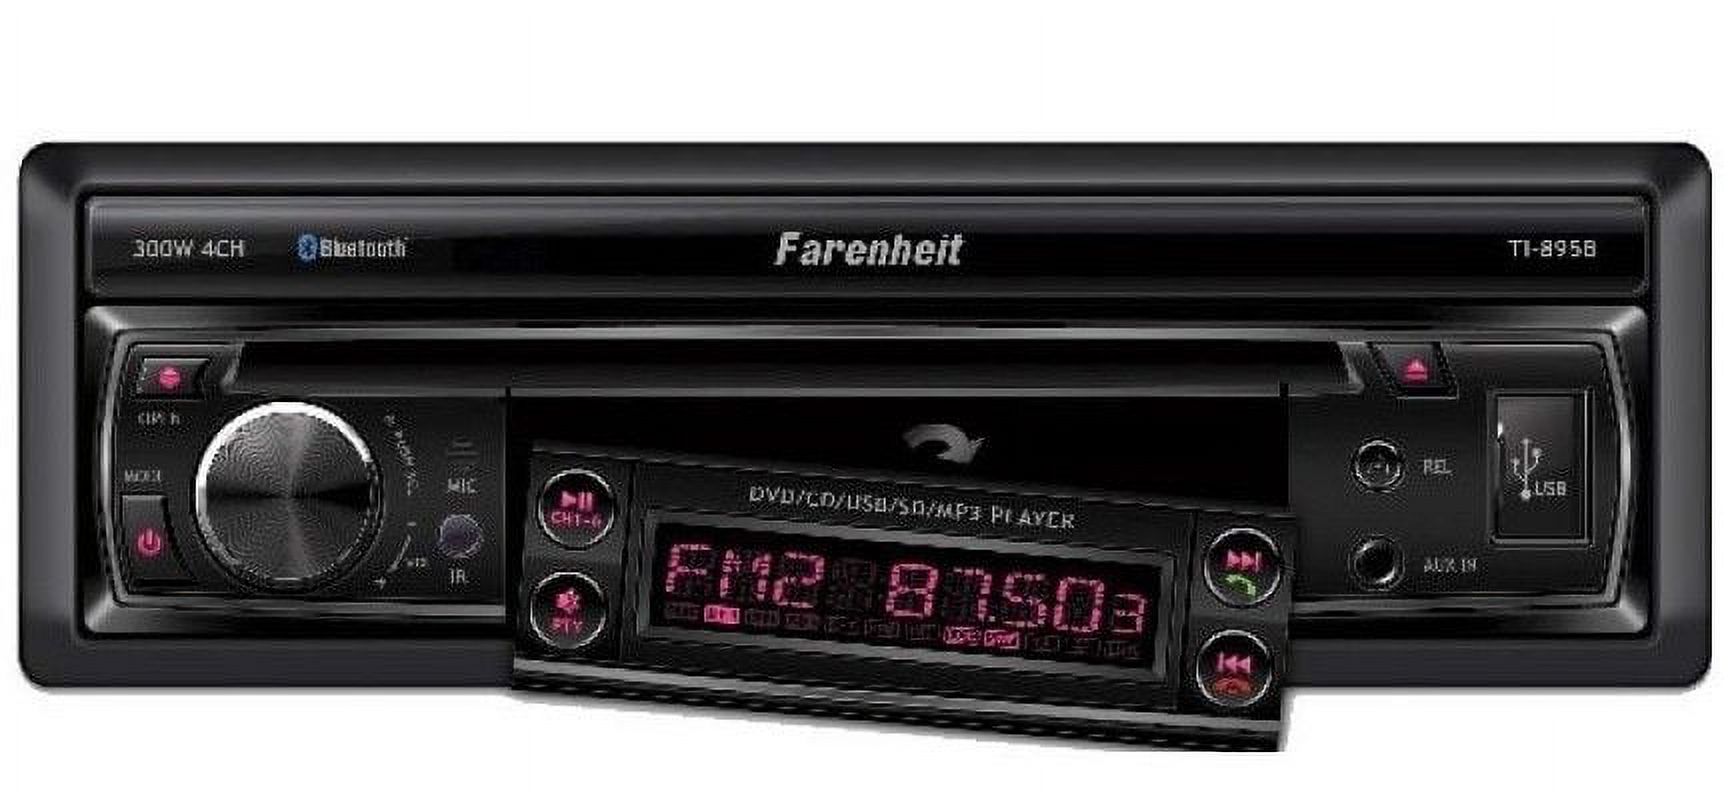 TI-895B - Farenheit In-Dash 1-DIN 7" Motorized Flip-Out LCD Touchscreen DVD/CD/USB Receiver with Bluetooth V3.0 - image 2 of 4